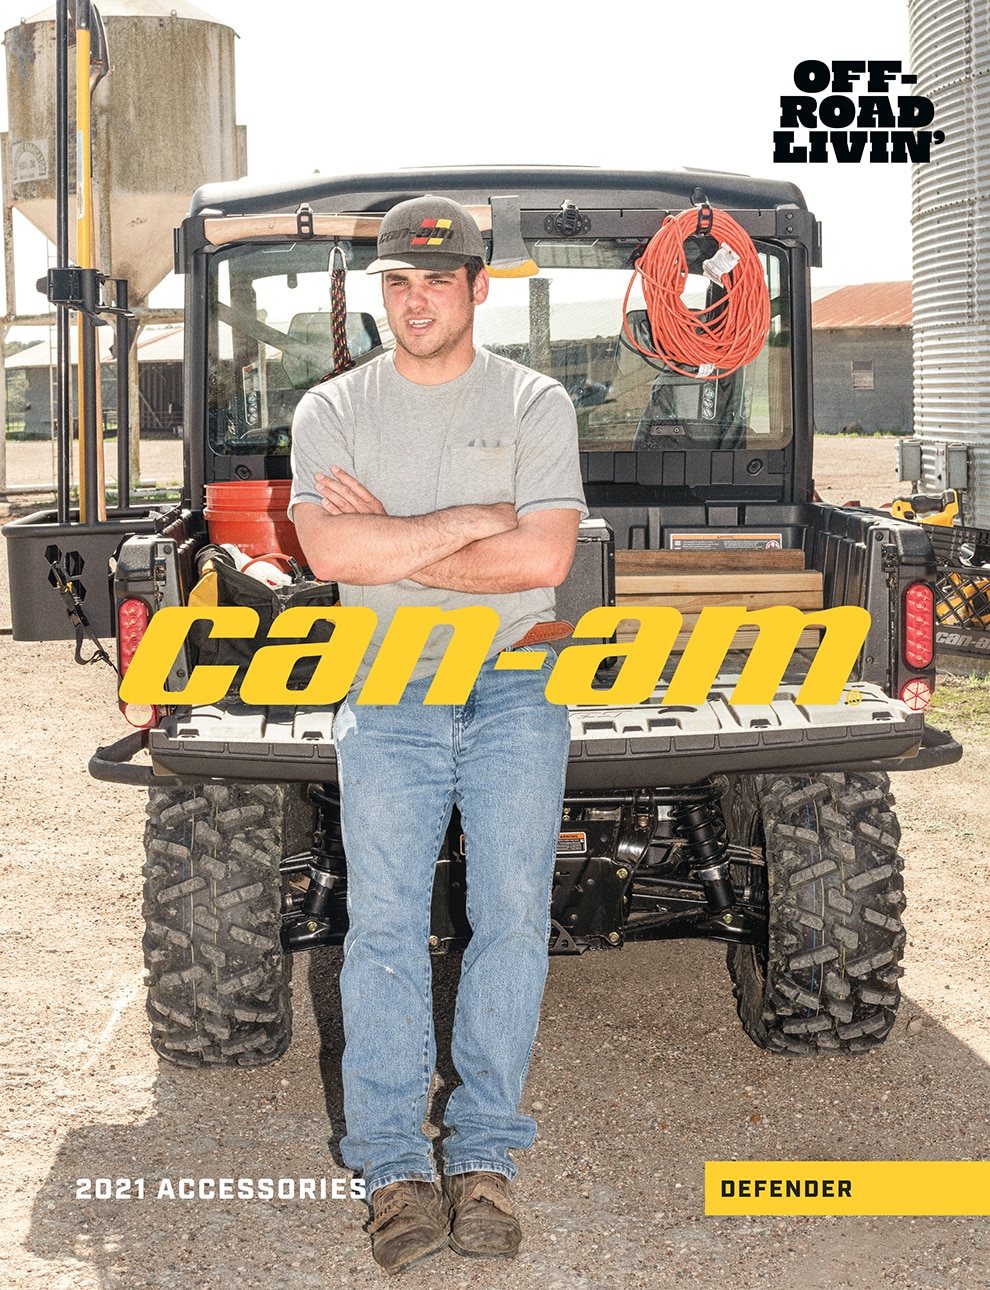 2021 Can-Am Defender Side-by-side vehicle accessories catalog